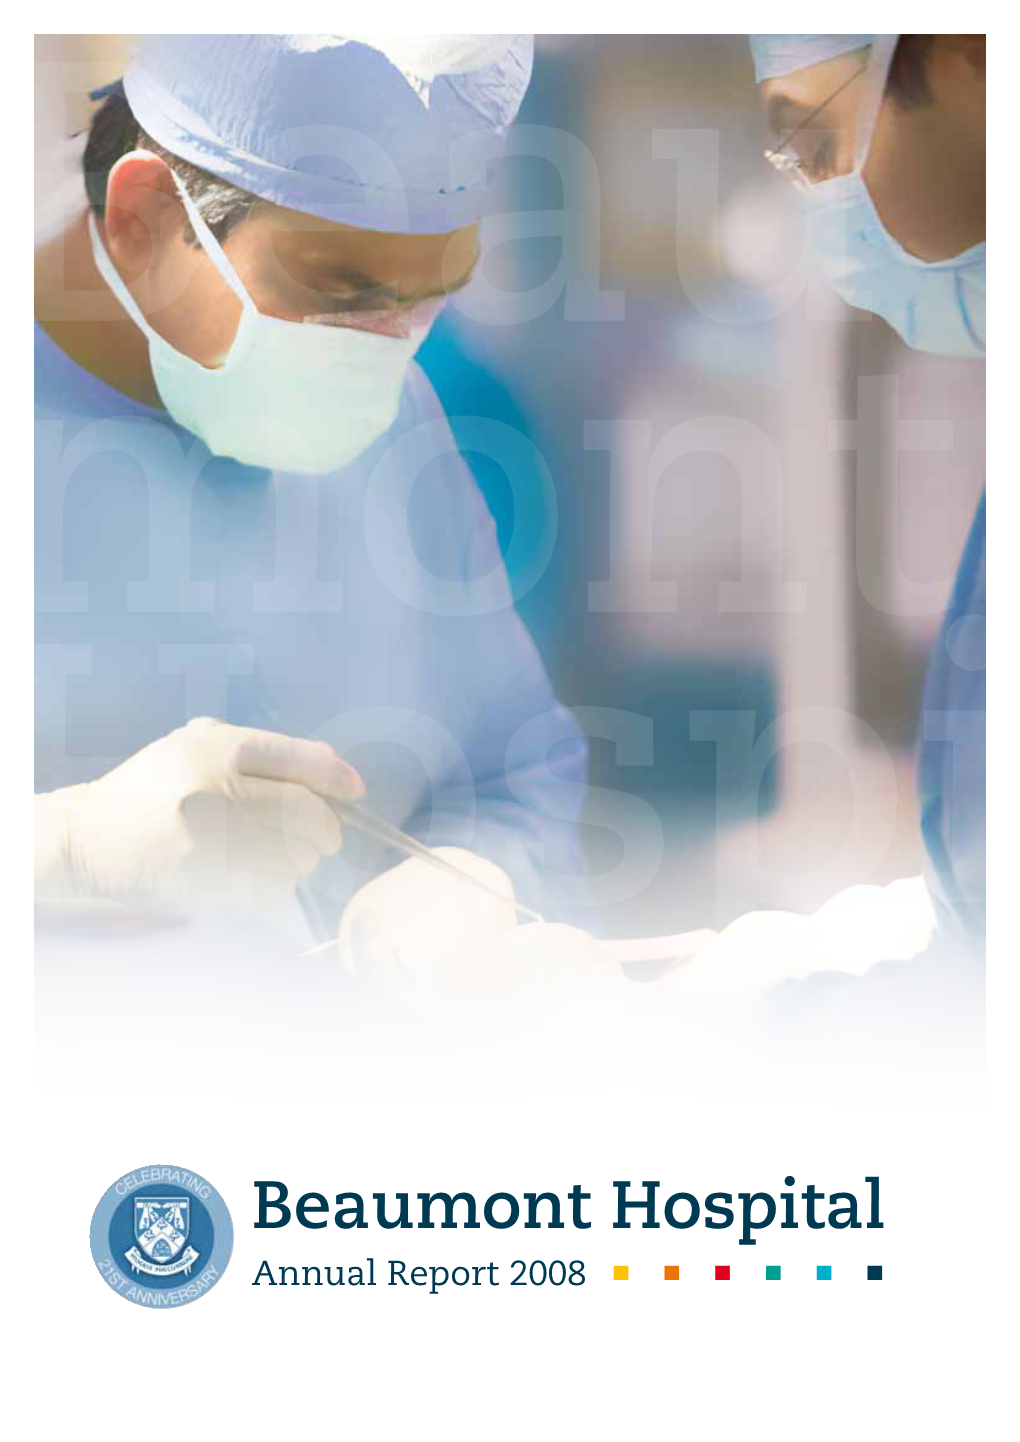 Beaumont Hospital Annual Report 2008